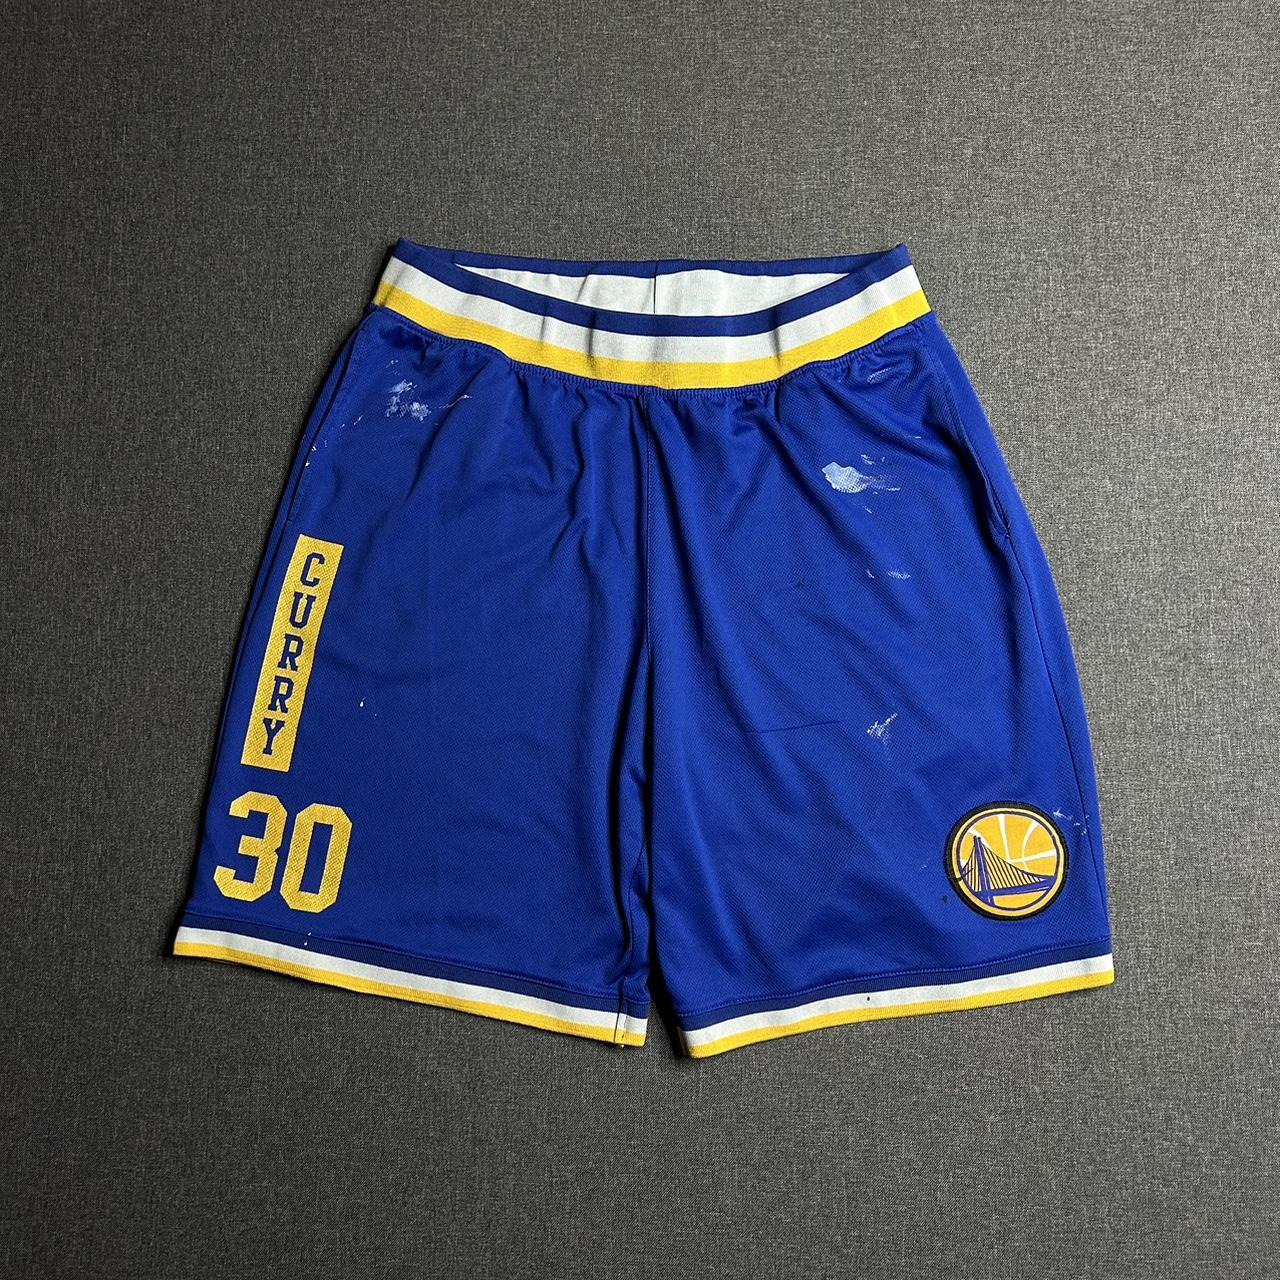  Steph Curry Shorts